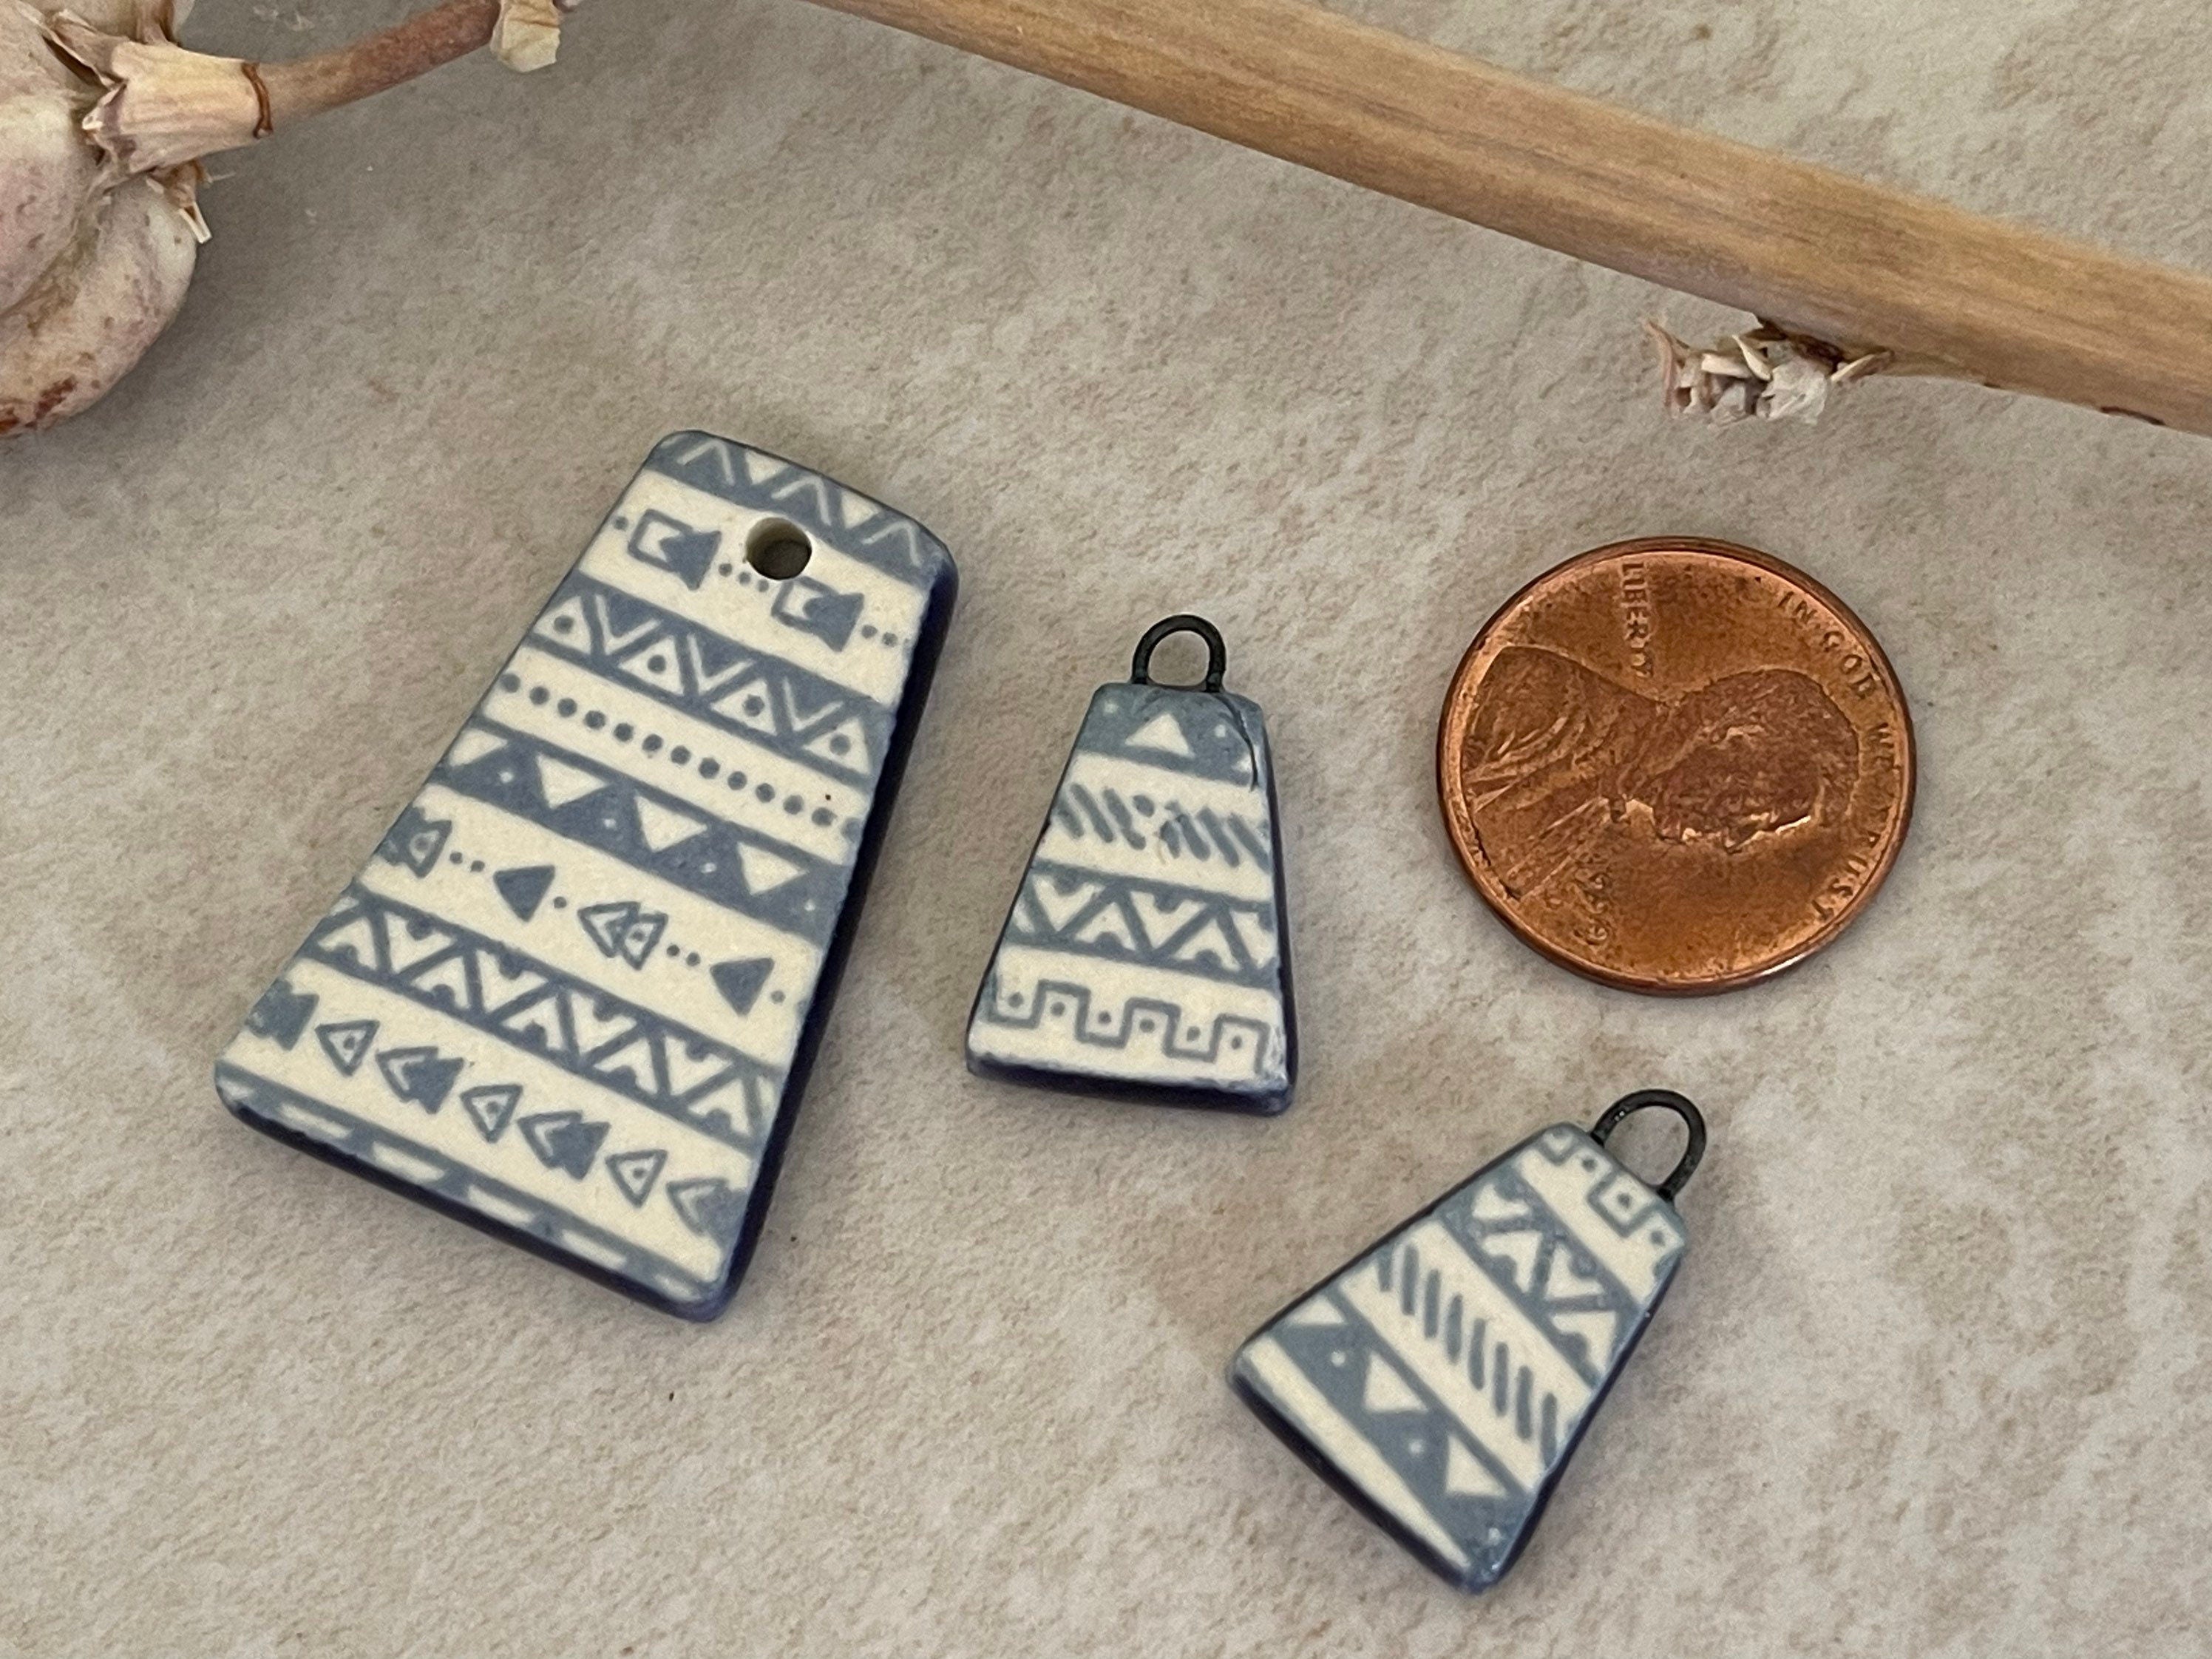 Rounded Triangle Pendant, Bead Set, Blue Geometric Earring Bead Pair, Porcelain Ceramic Charms, Jewelry Making Components, Beading Handmade